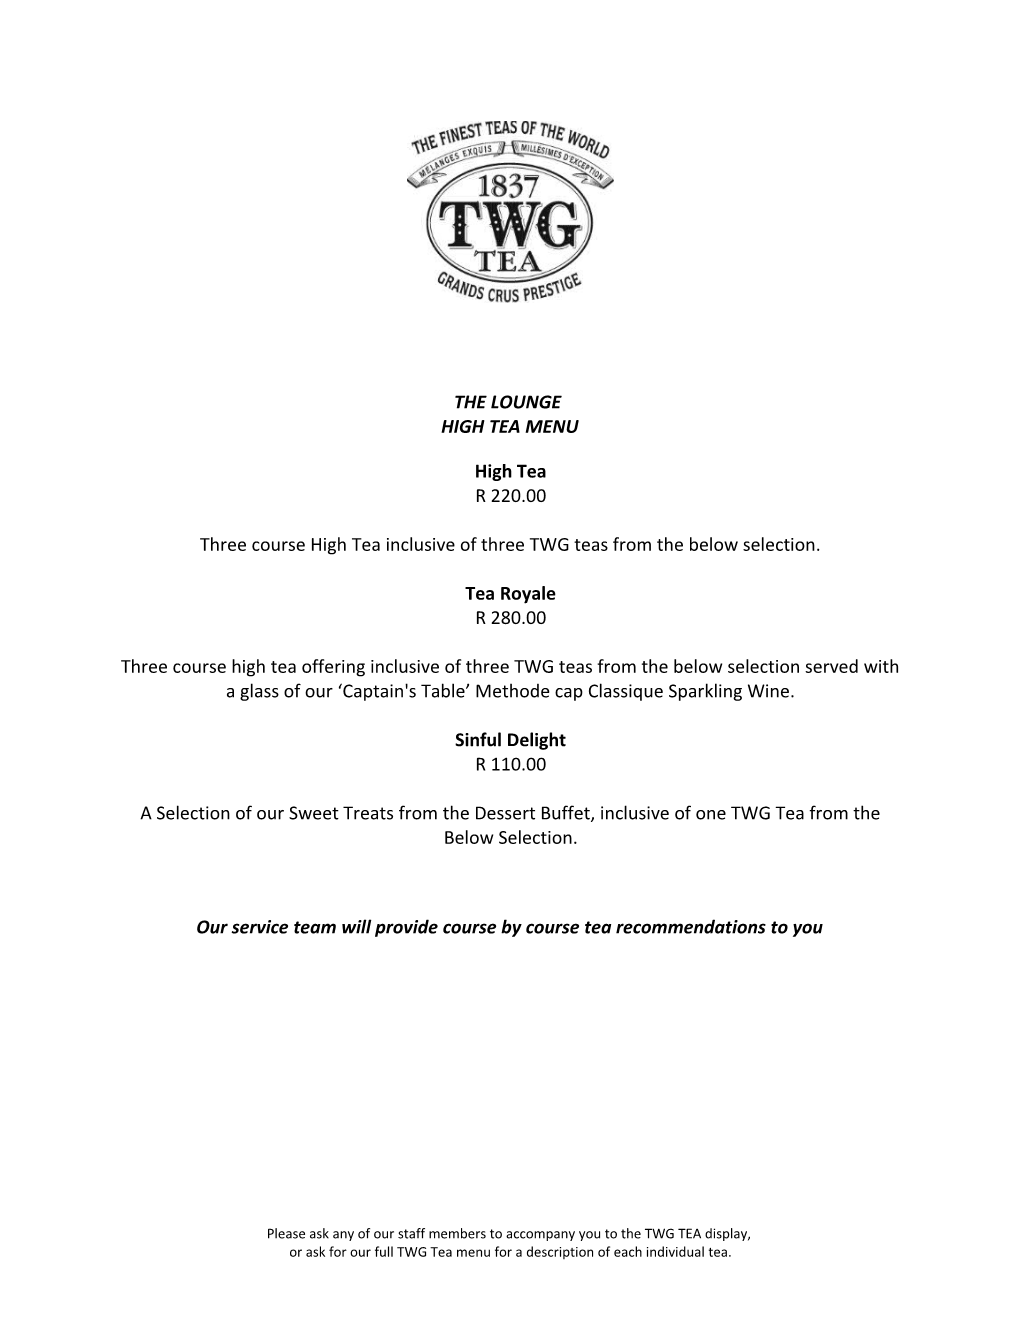 Three Course High Tea Inclusive of Three TWG Teas from the Below Selection